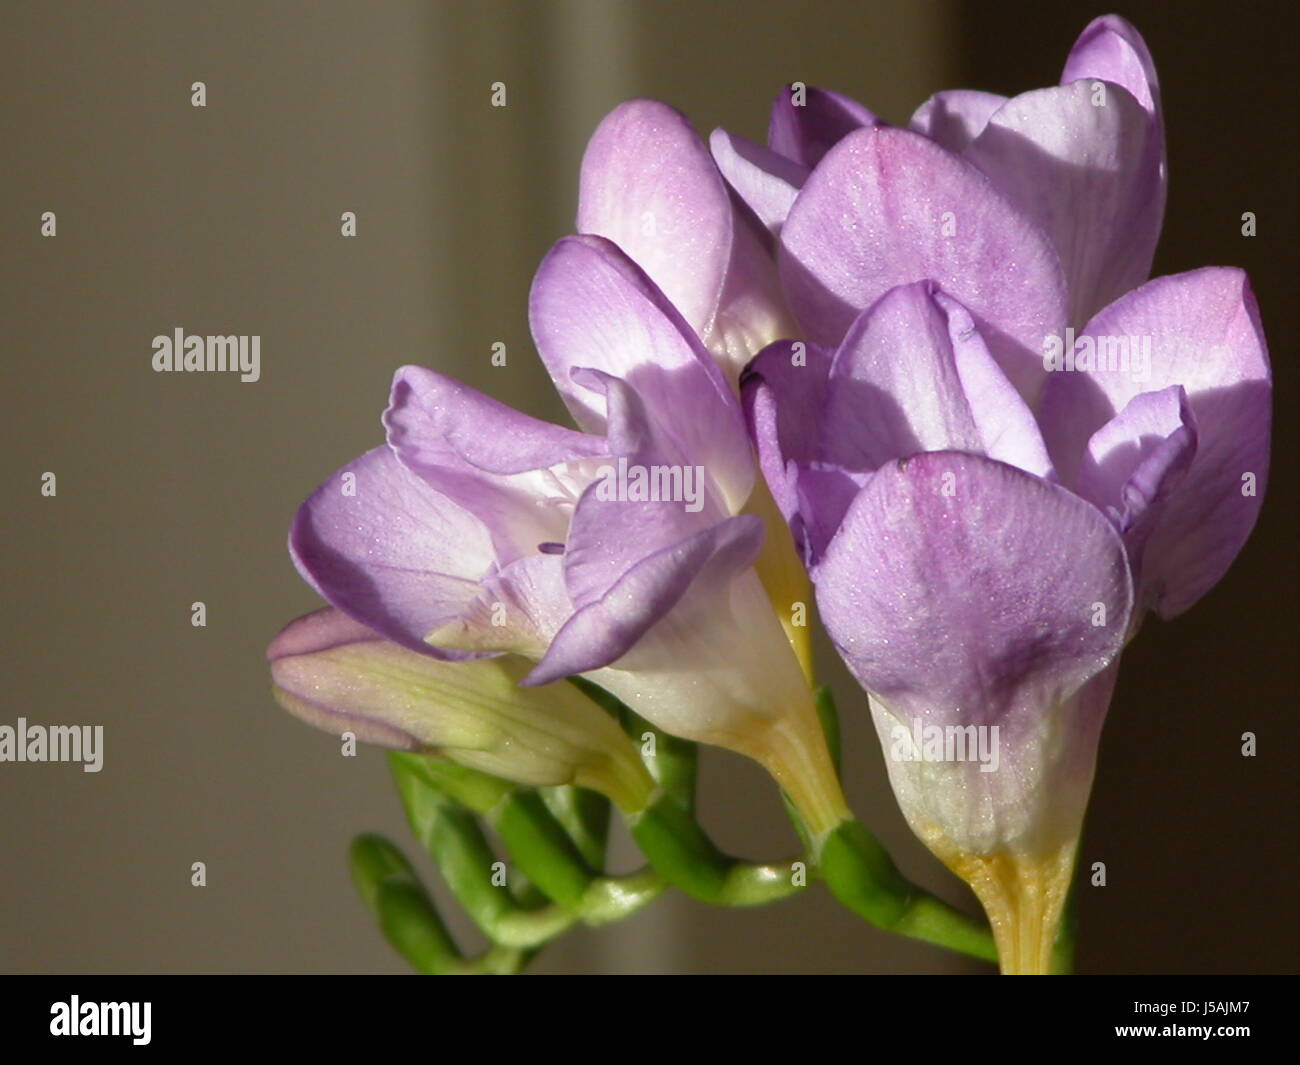 macro close-up macro admission close up view flower plant bloom blossom Stock Photo